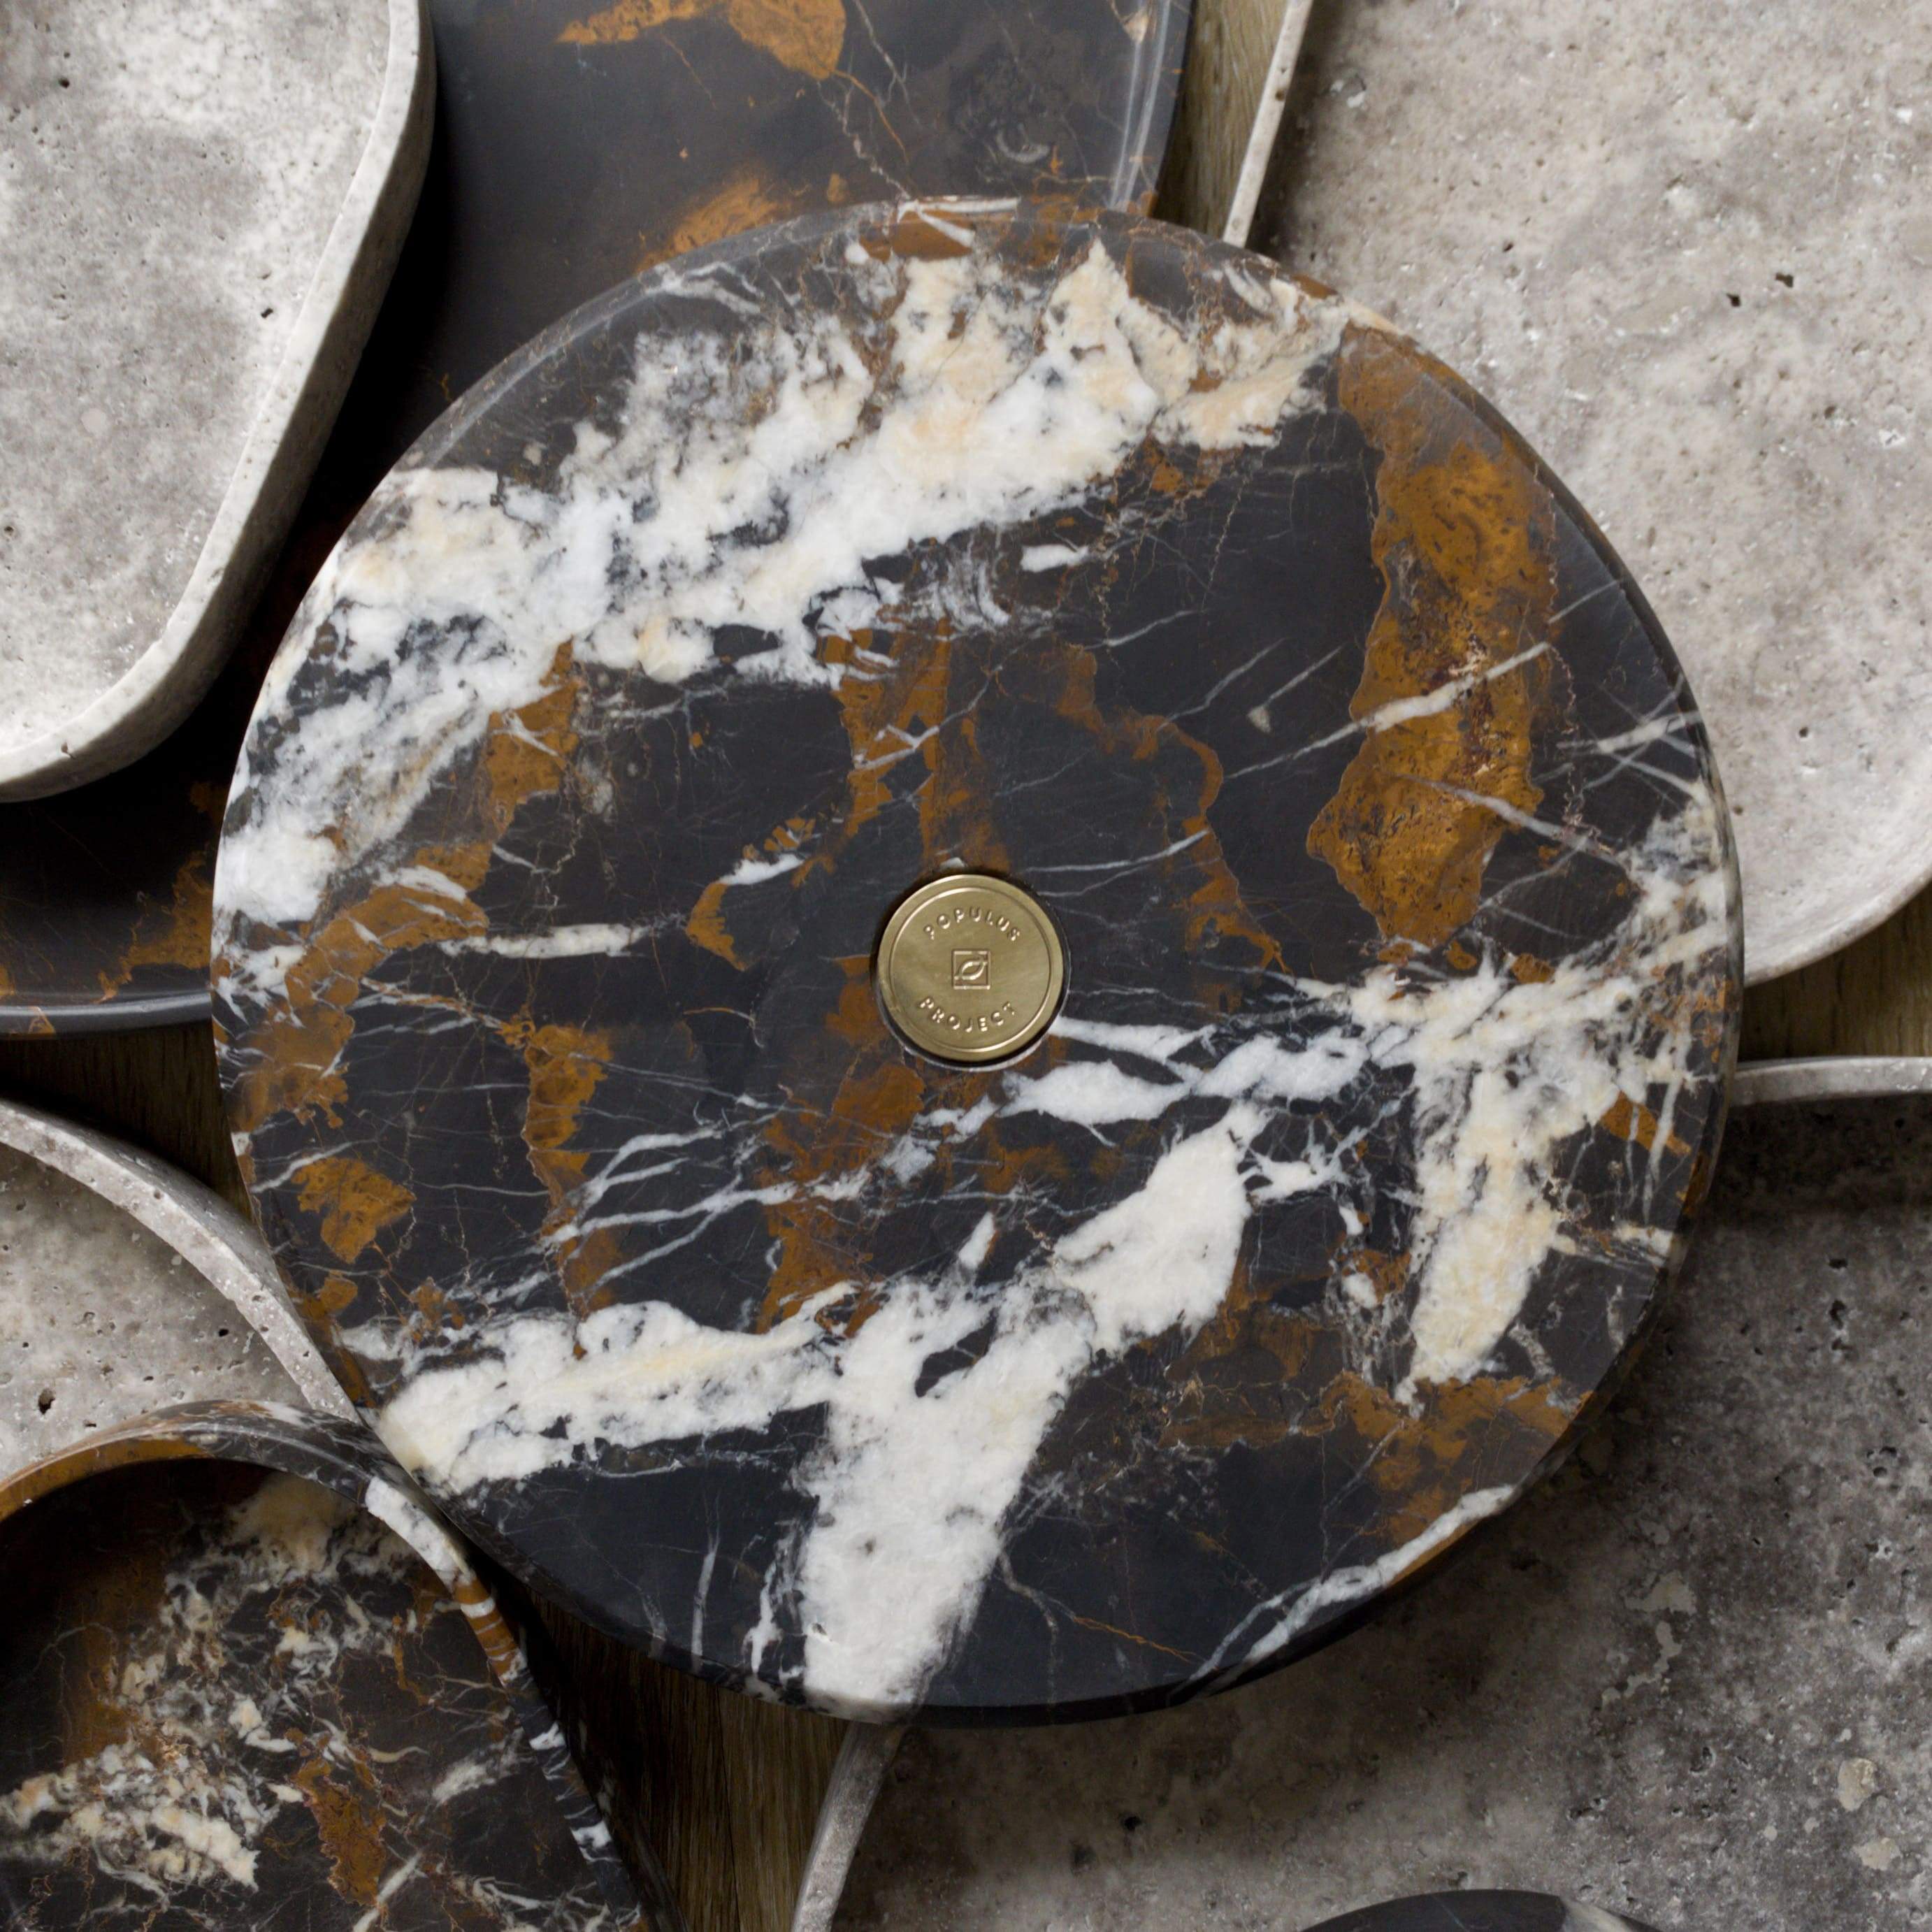 marble and travertine stone round trays with brass logo coin used as home decor and accessories